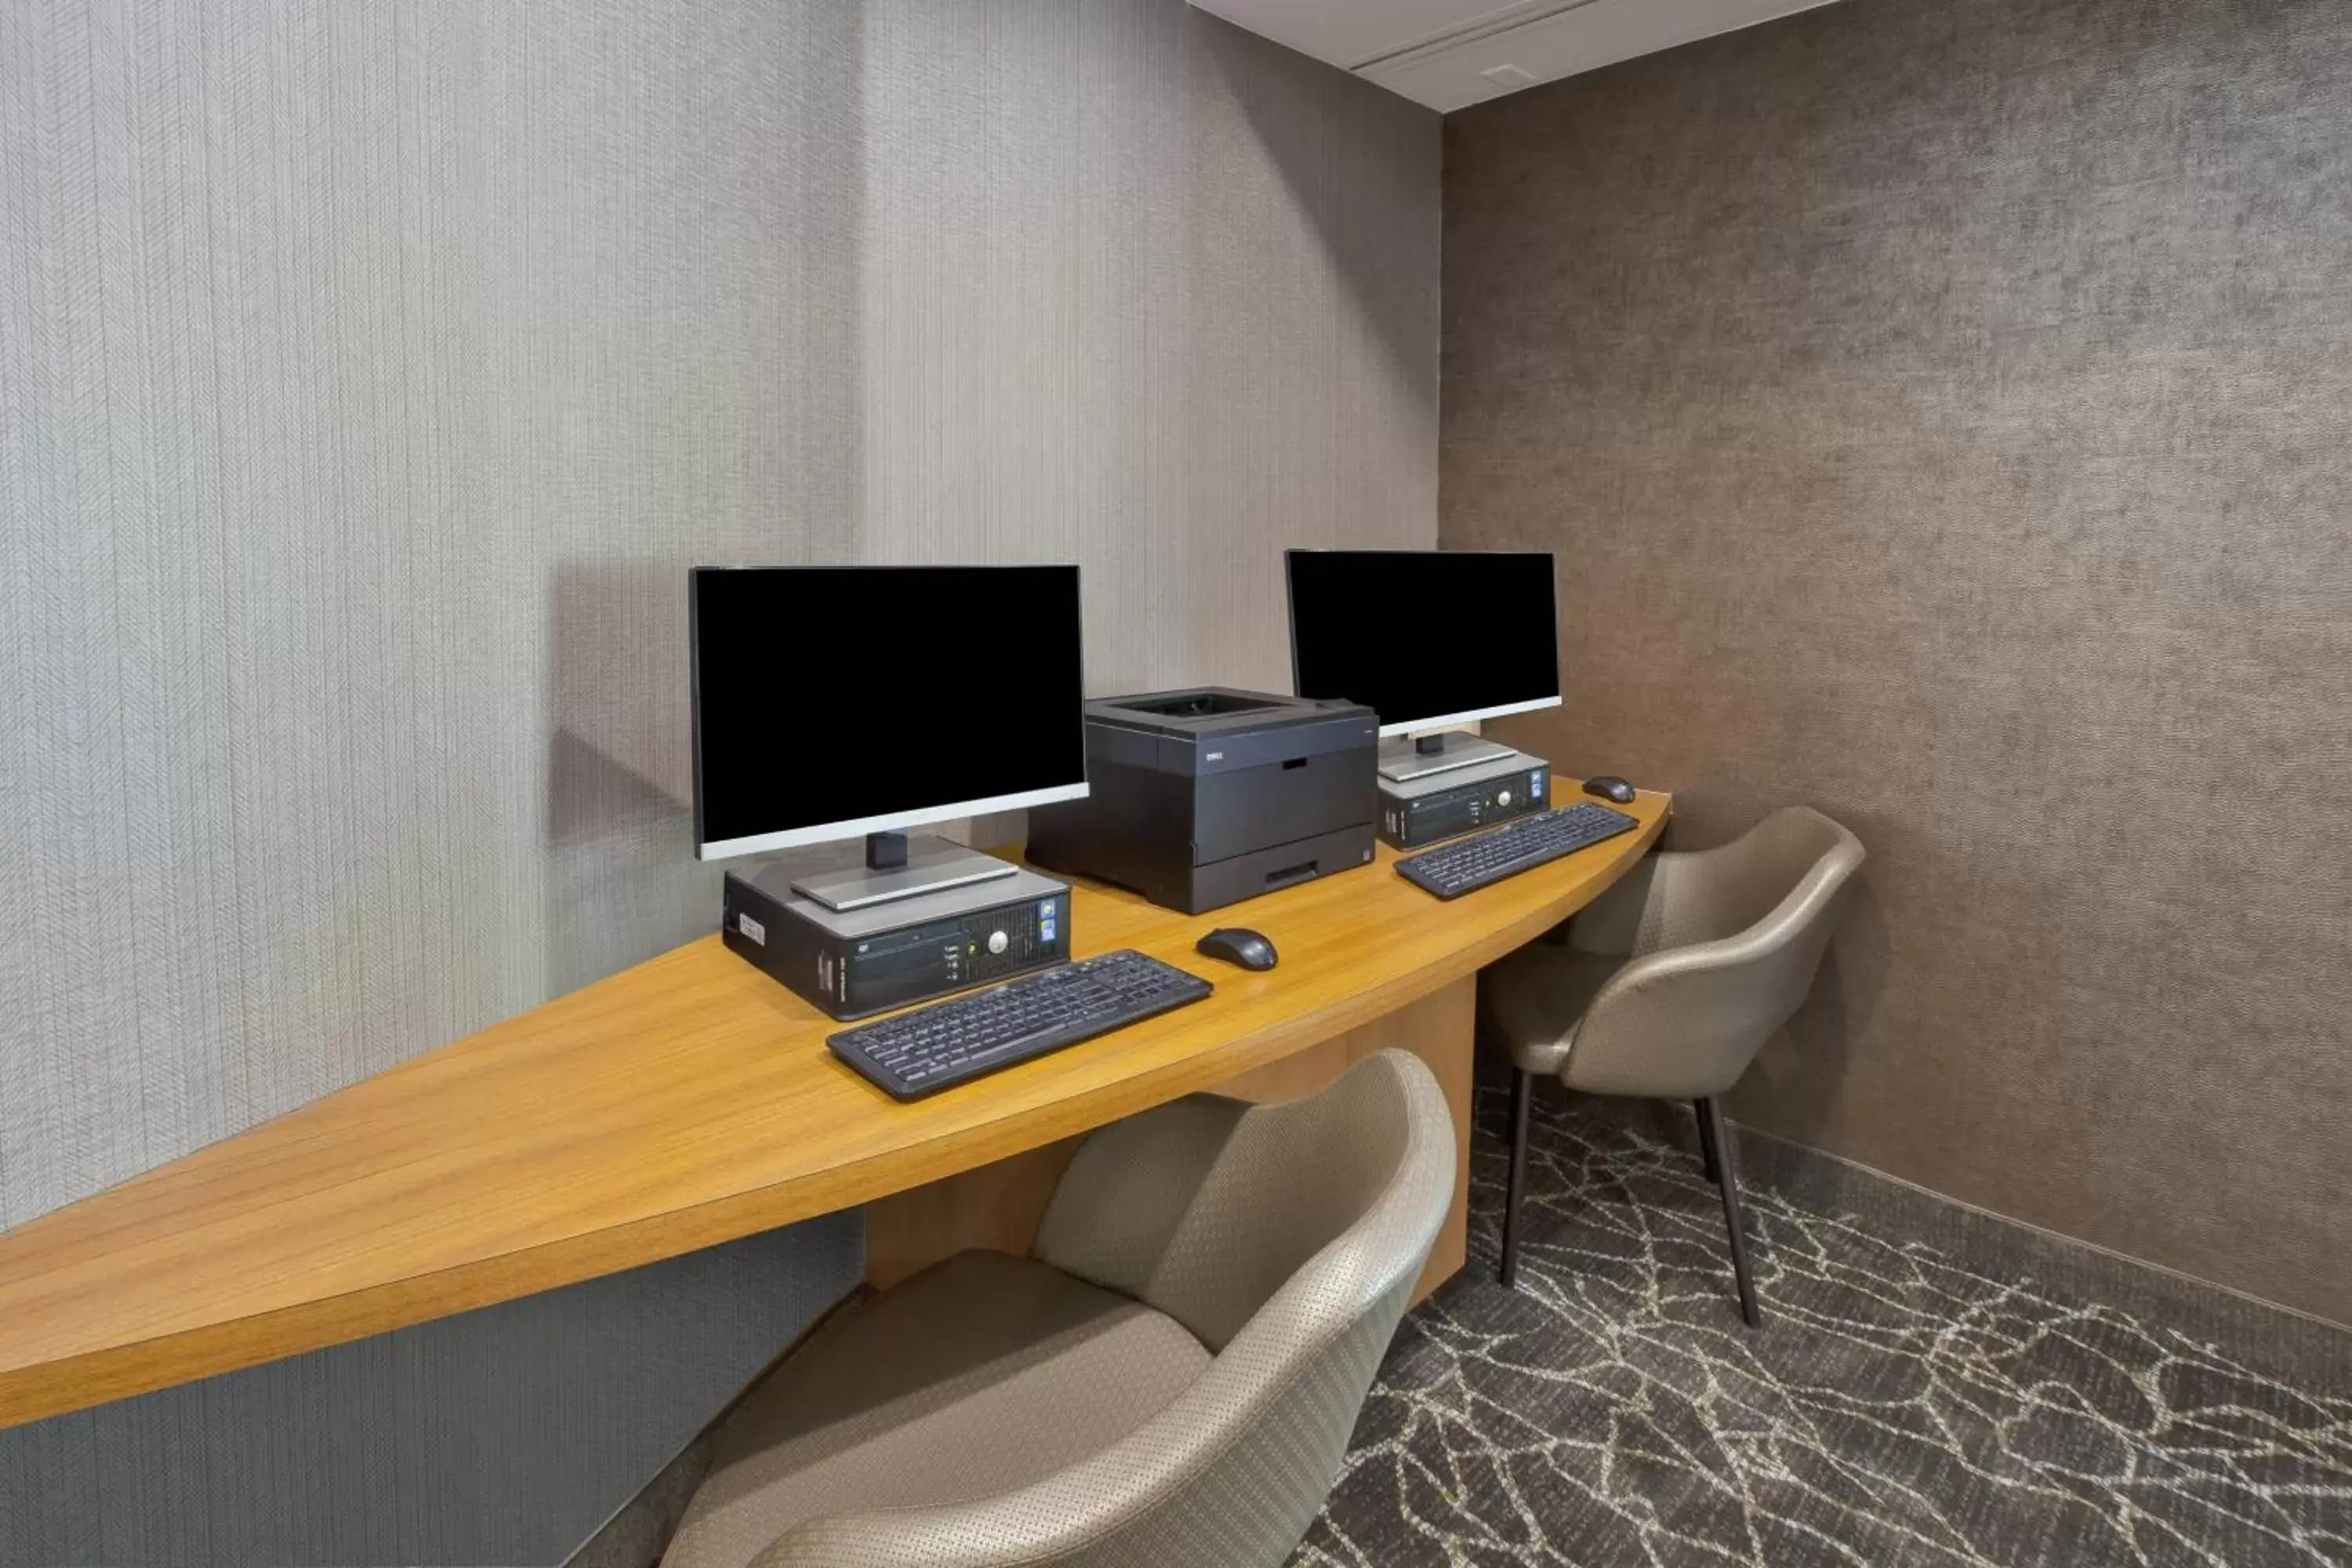 Business facilities in SpringHill Suites Minneapolis-St. Paul Airport/Eagan